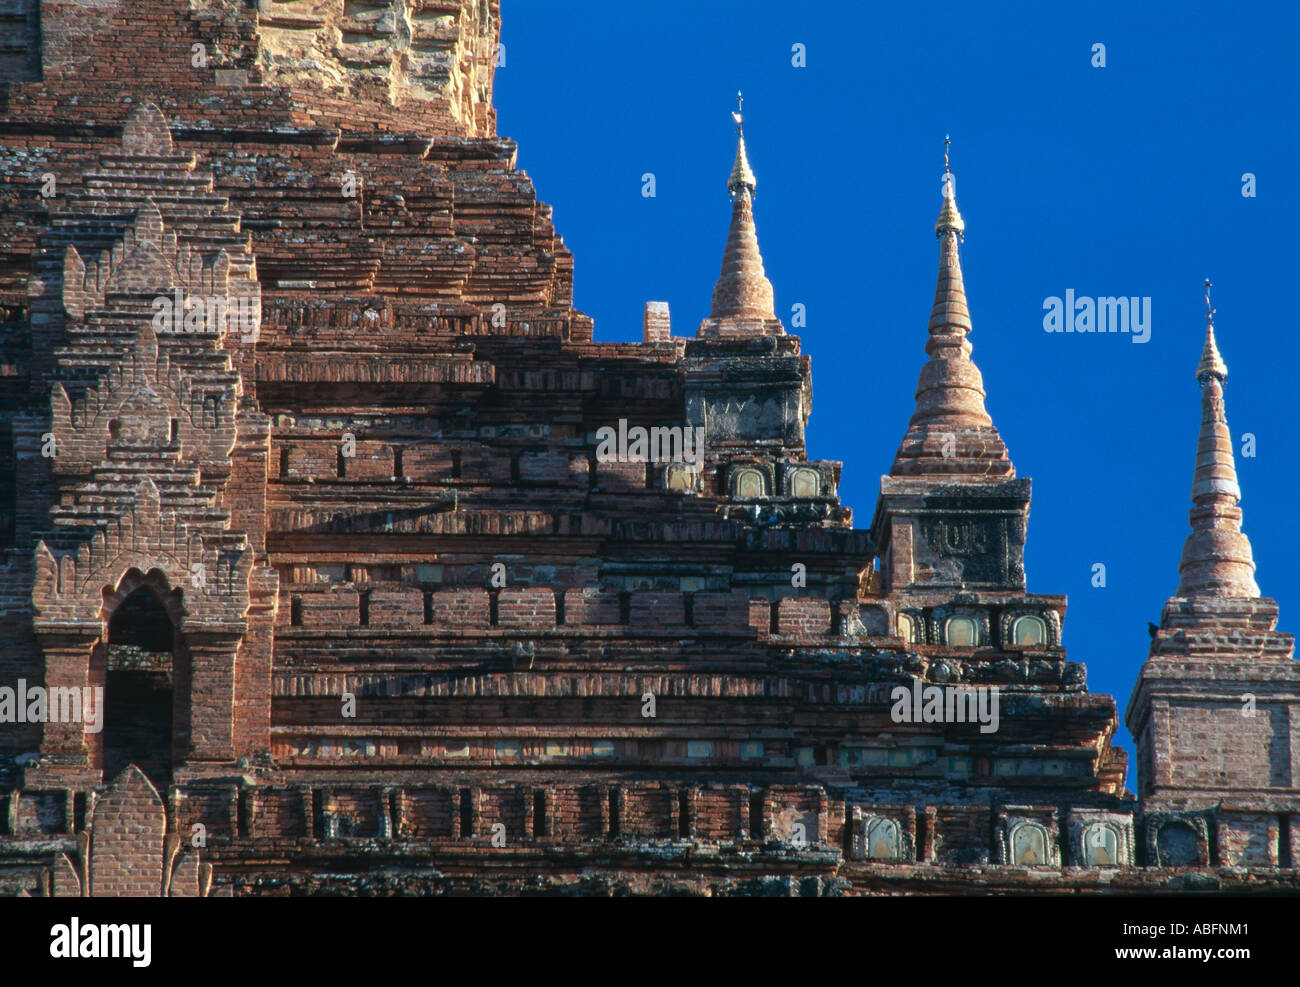 Temple of Htilominio, Pagan, north of Myanmar, Burma. built in 1211 for King Nantoungyma. Stock Photo